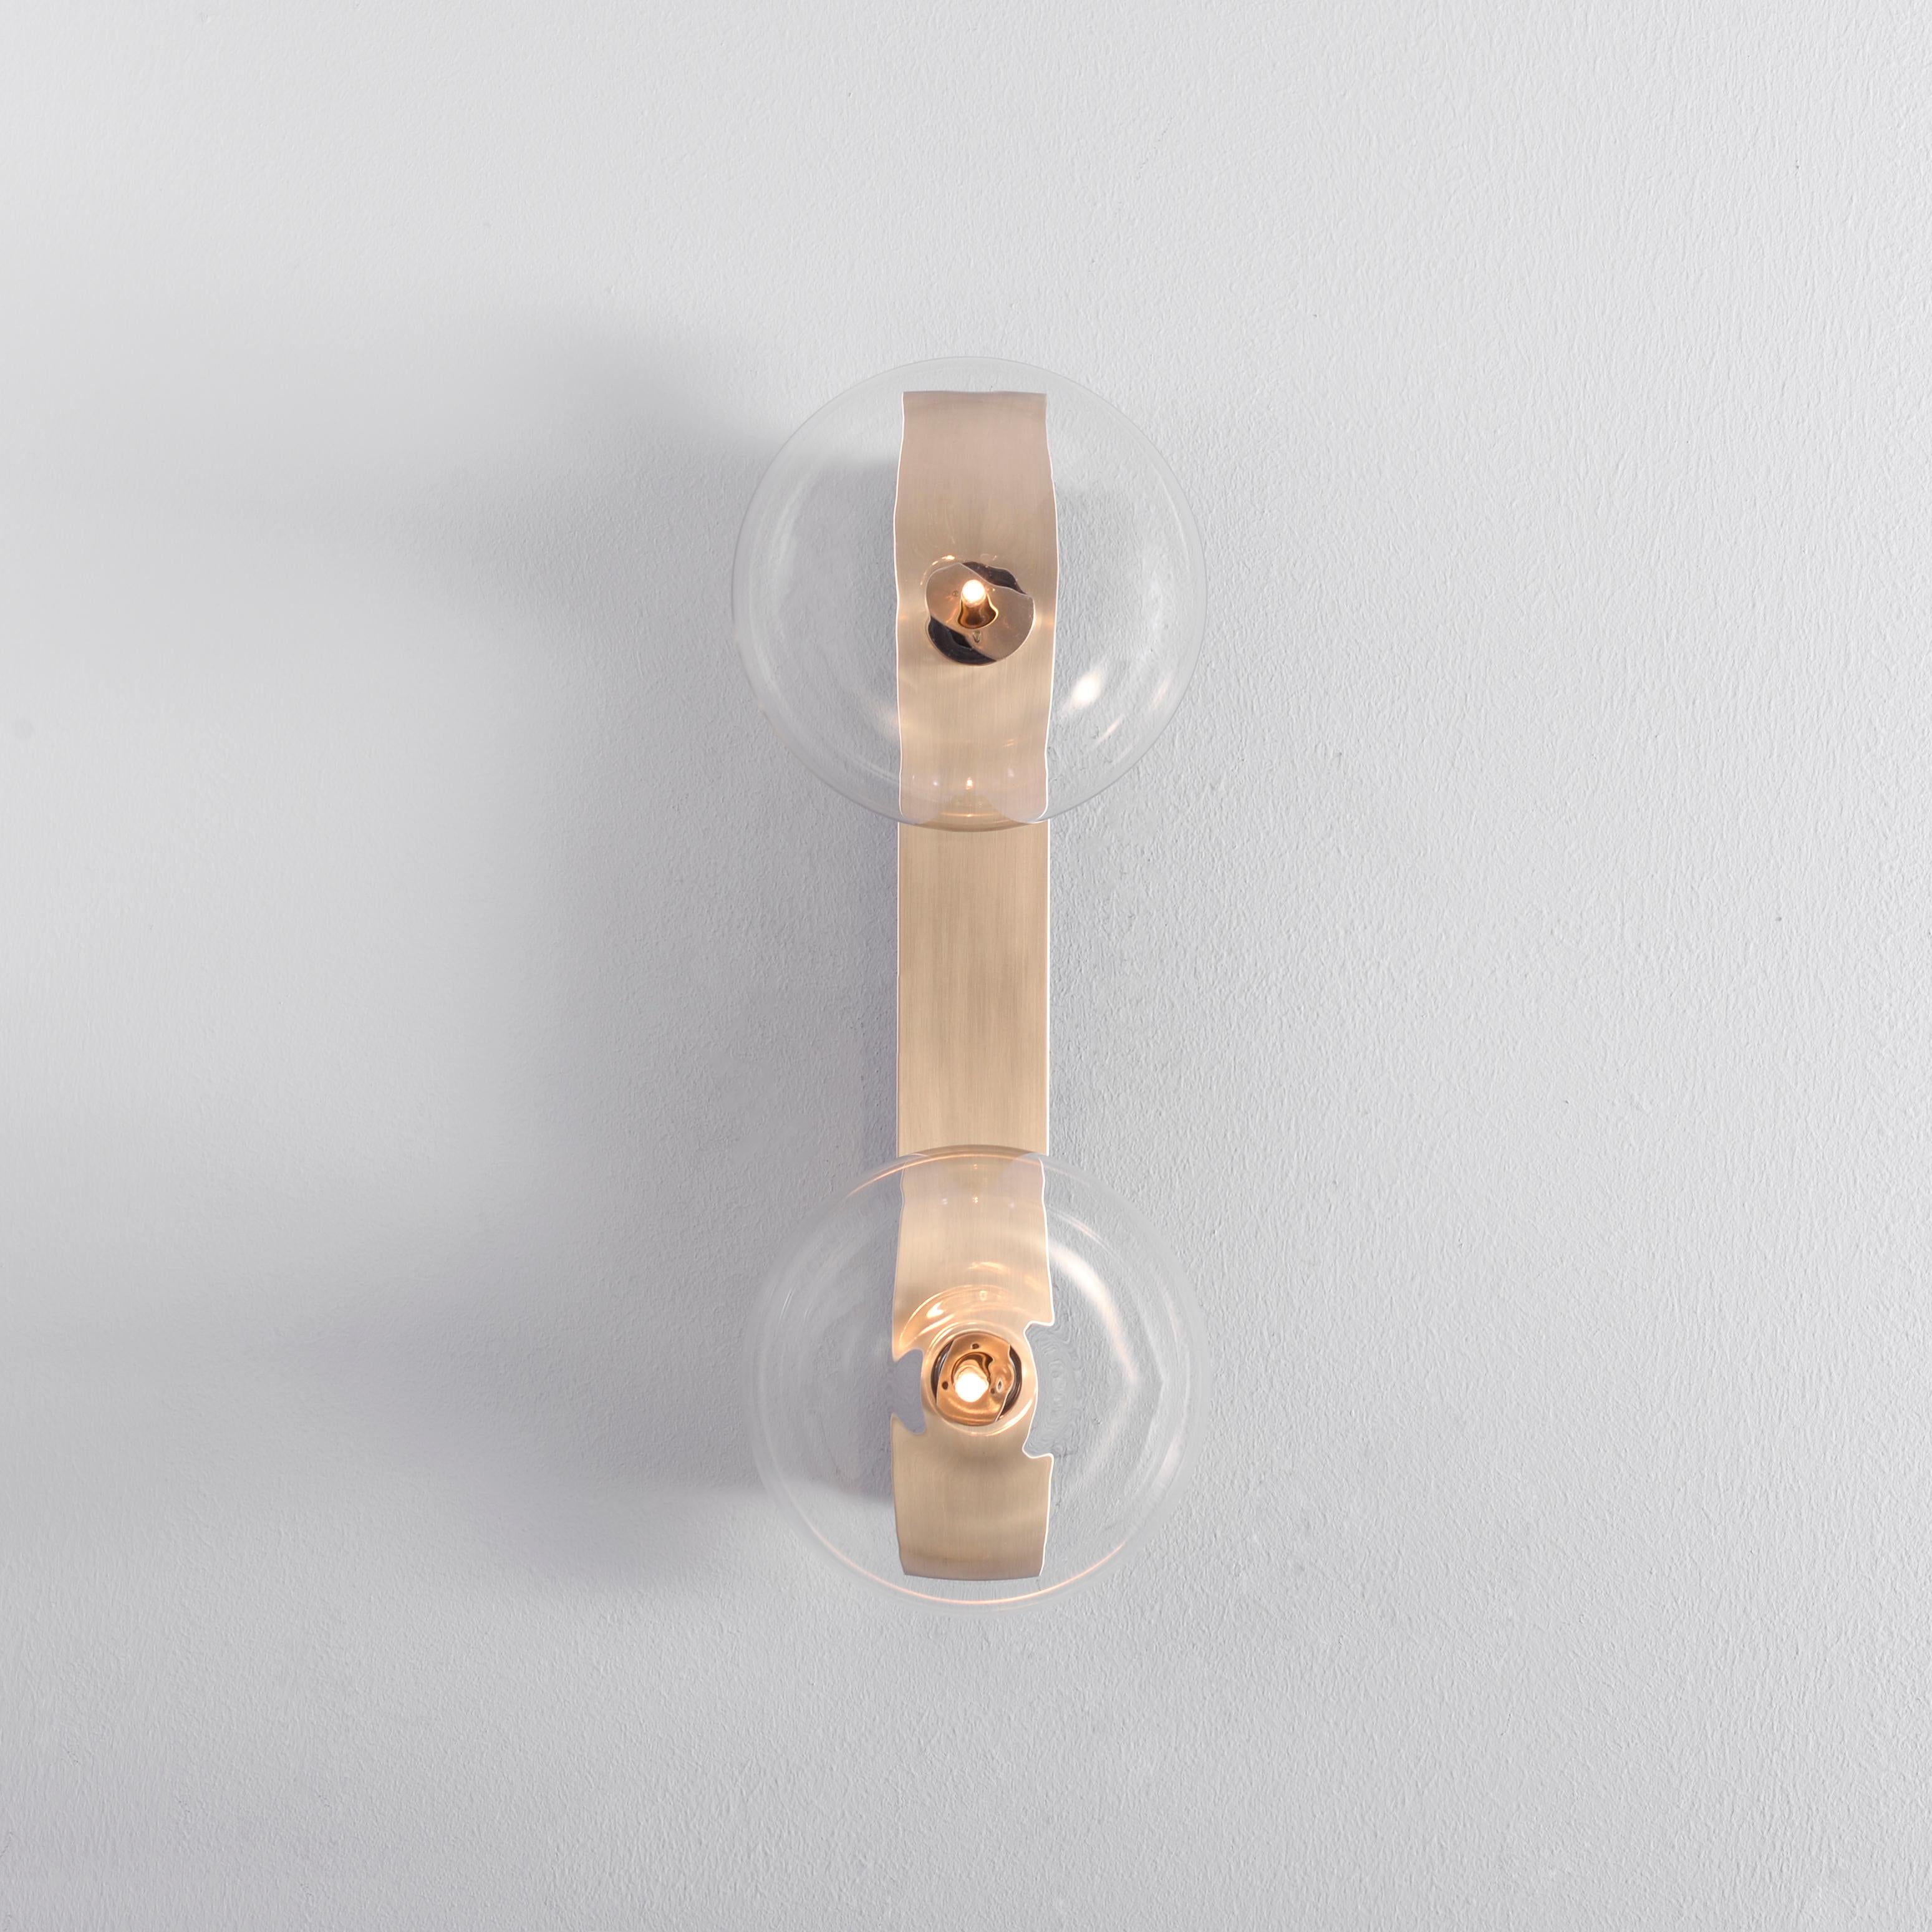 Contemporary Oslo Dual Wall Sconce by Schwung